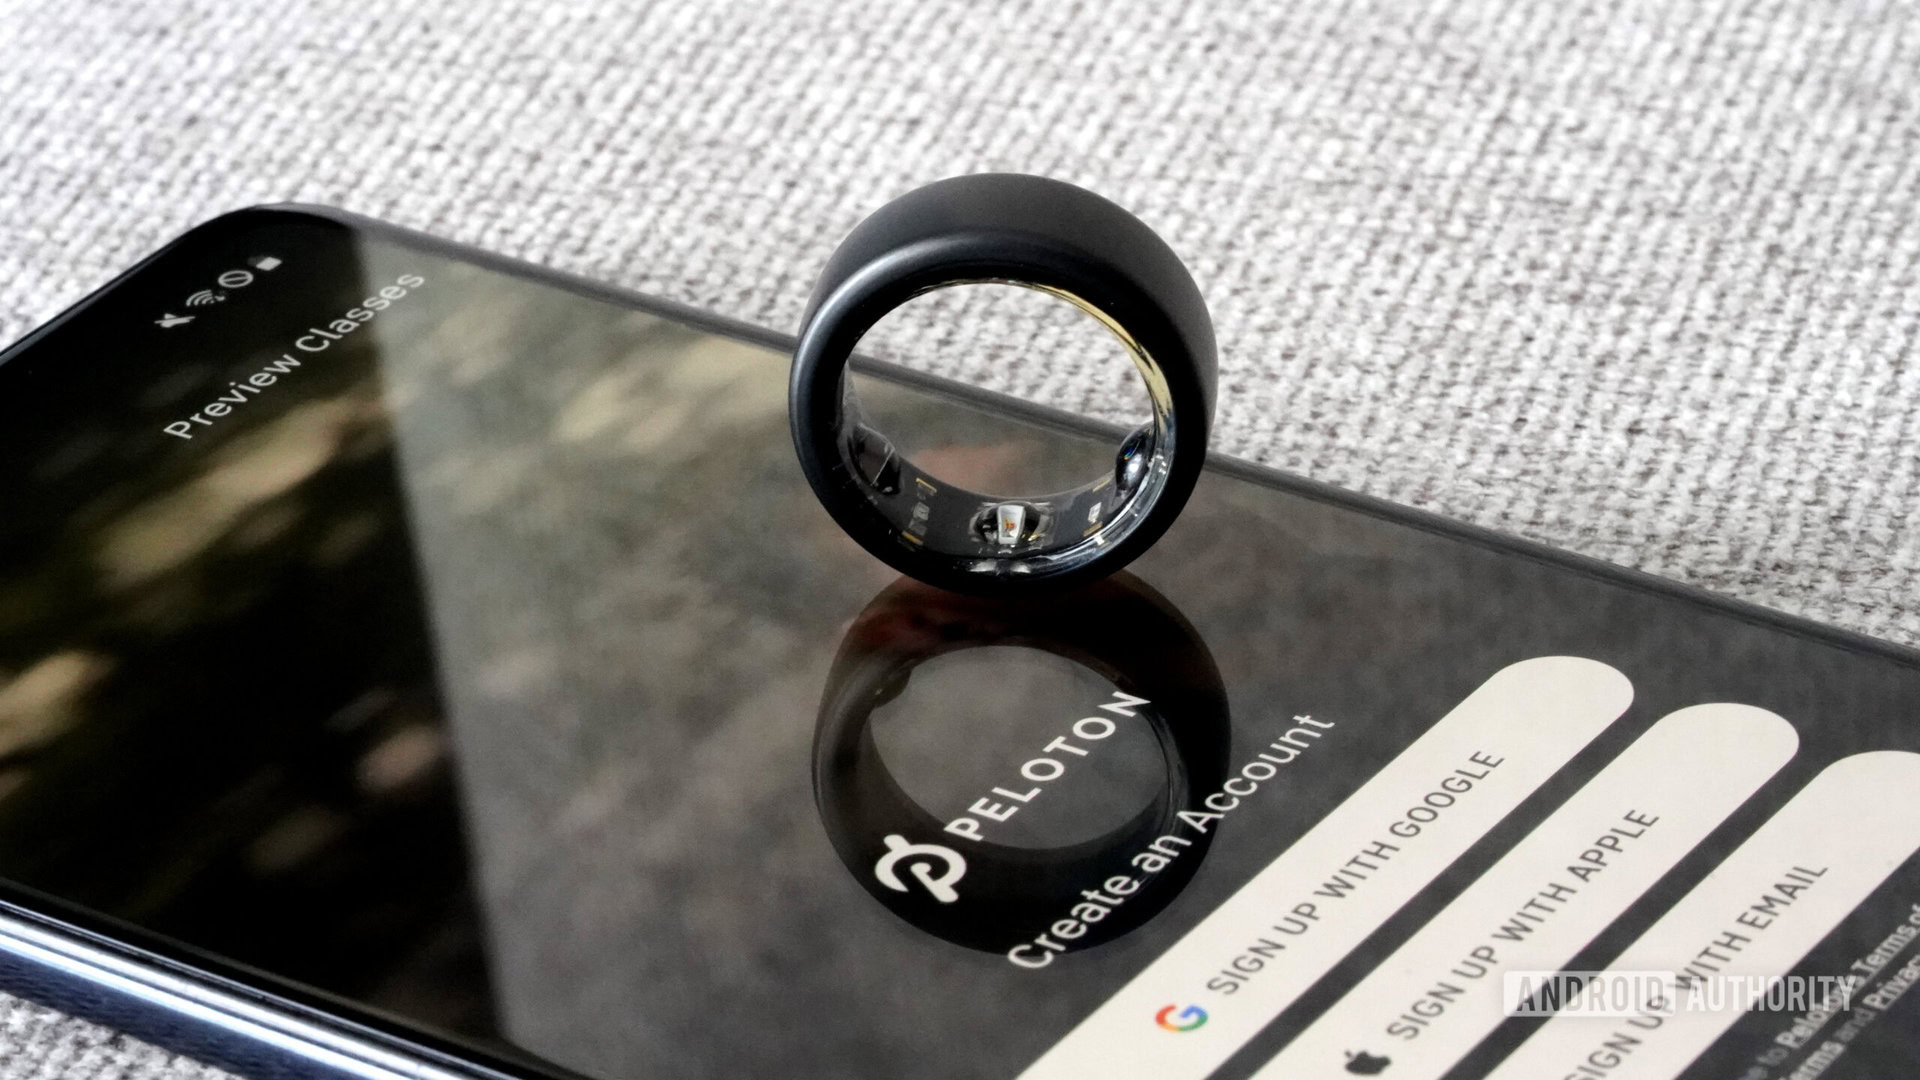 https://www.androidauthority.com/wp-content/uploads/2023/05/Oura-Ring-3-Peloton-scaled.jpg